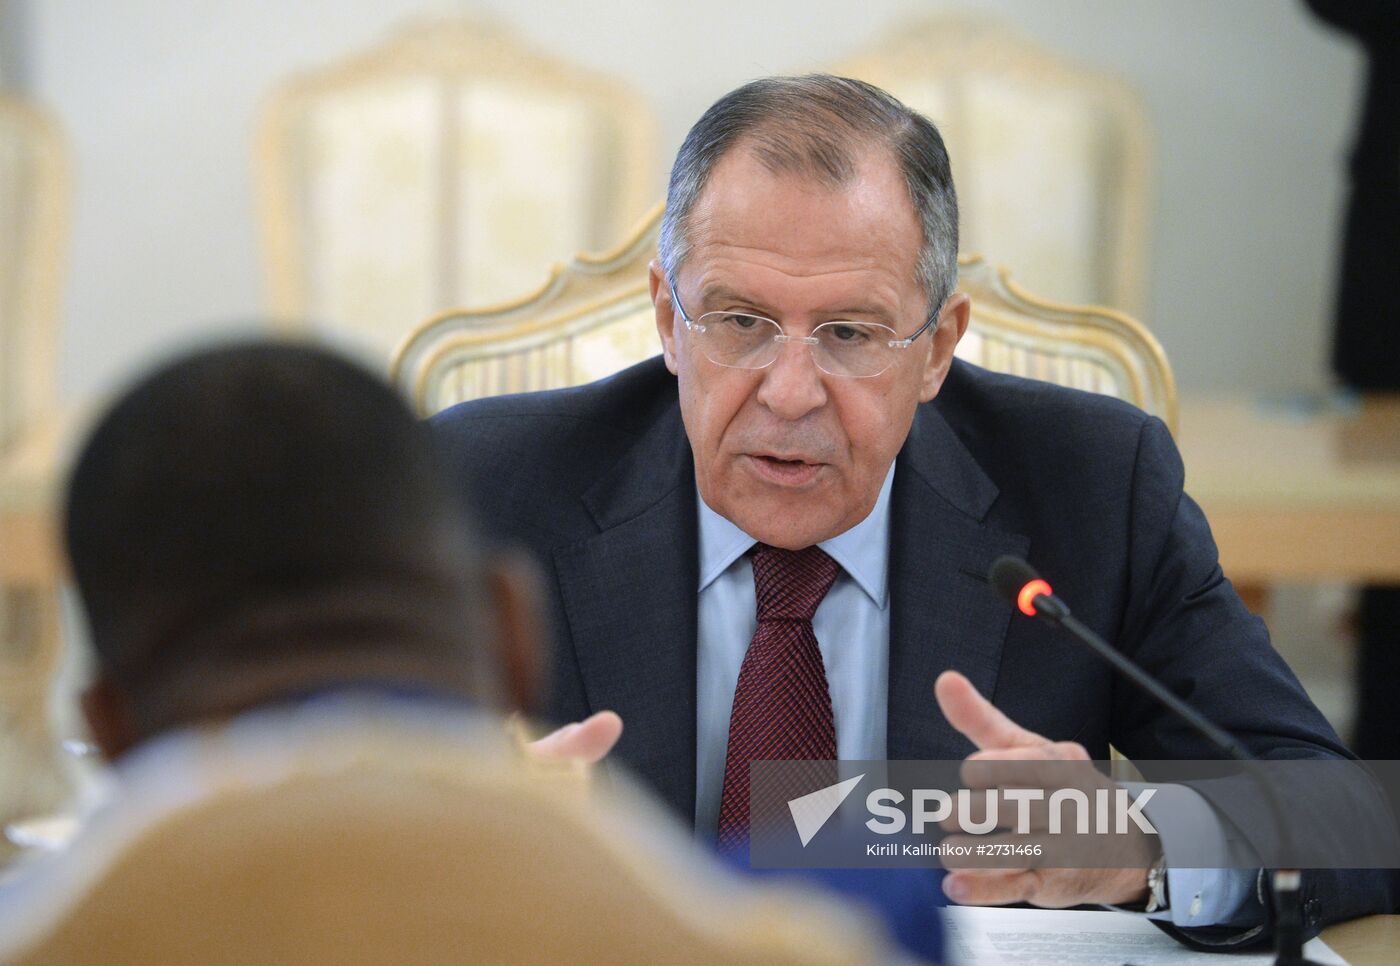 Russian Foreign Minister Sergey Lavrov meets with Jean-Claude Gakosso